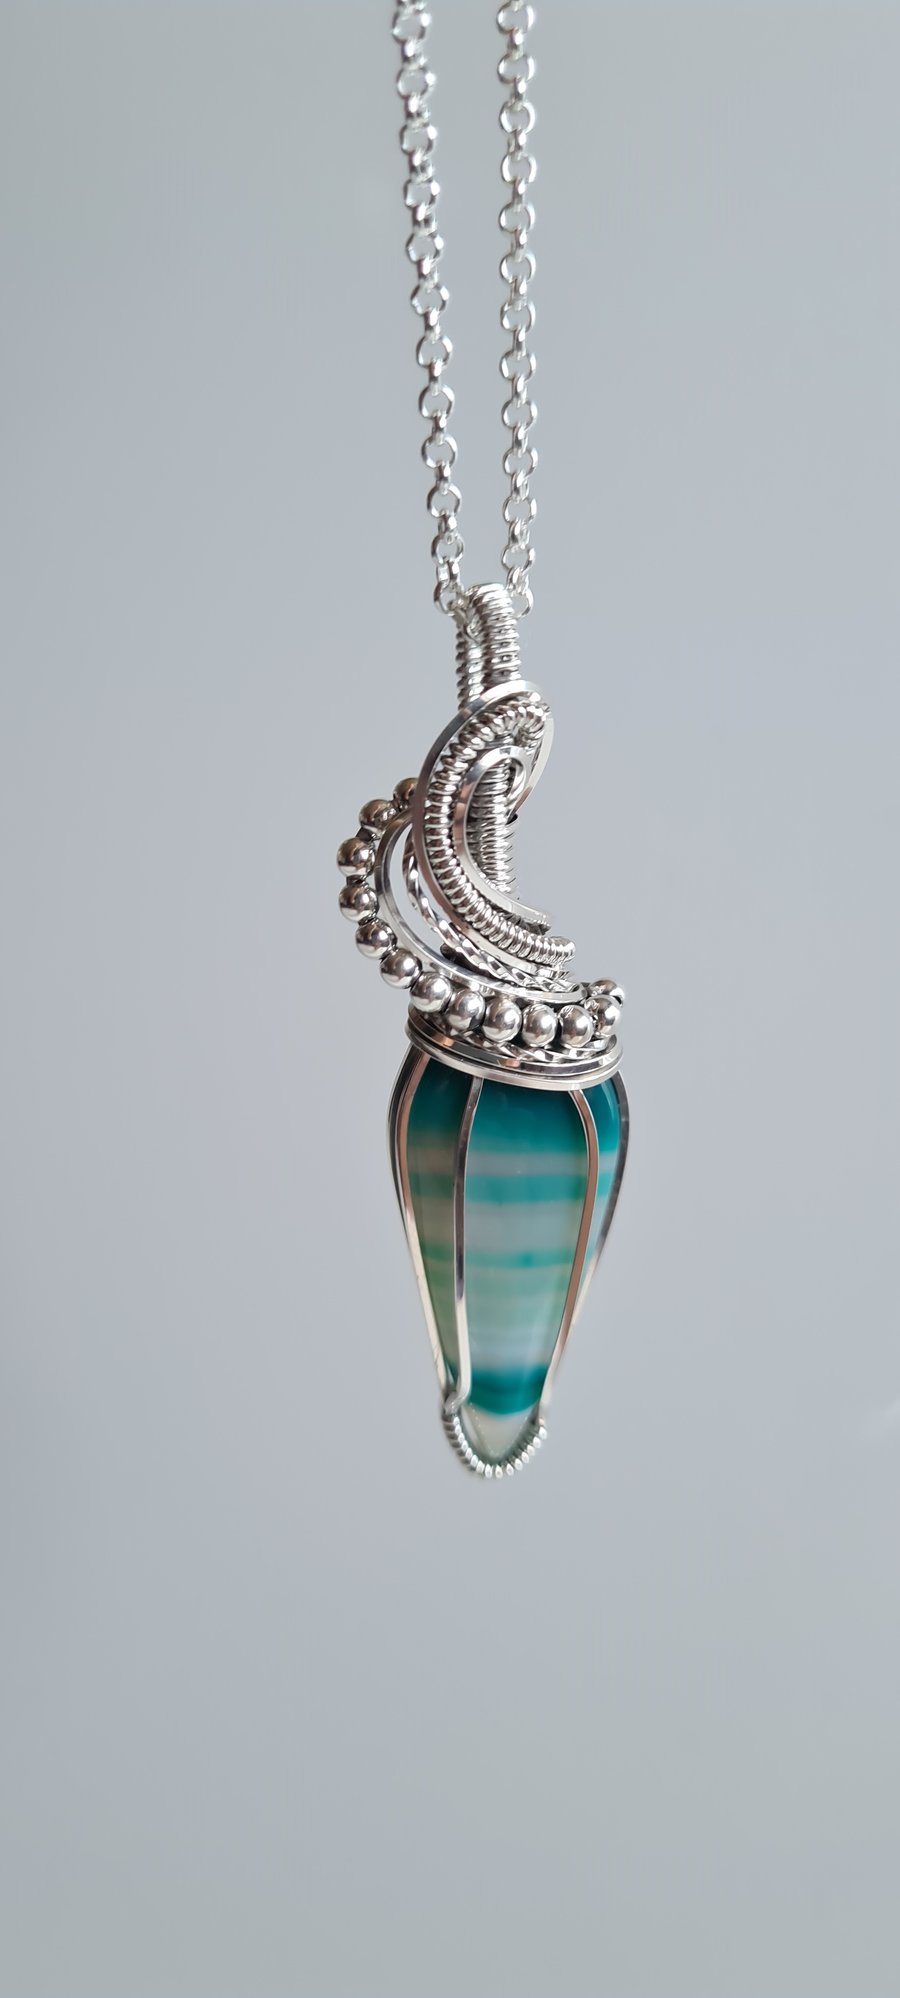 Elegant 925 Silver & Green Botswana Agate Necklace Pendant with Silver Chain